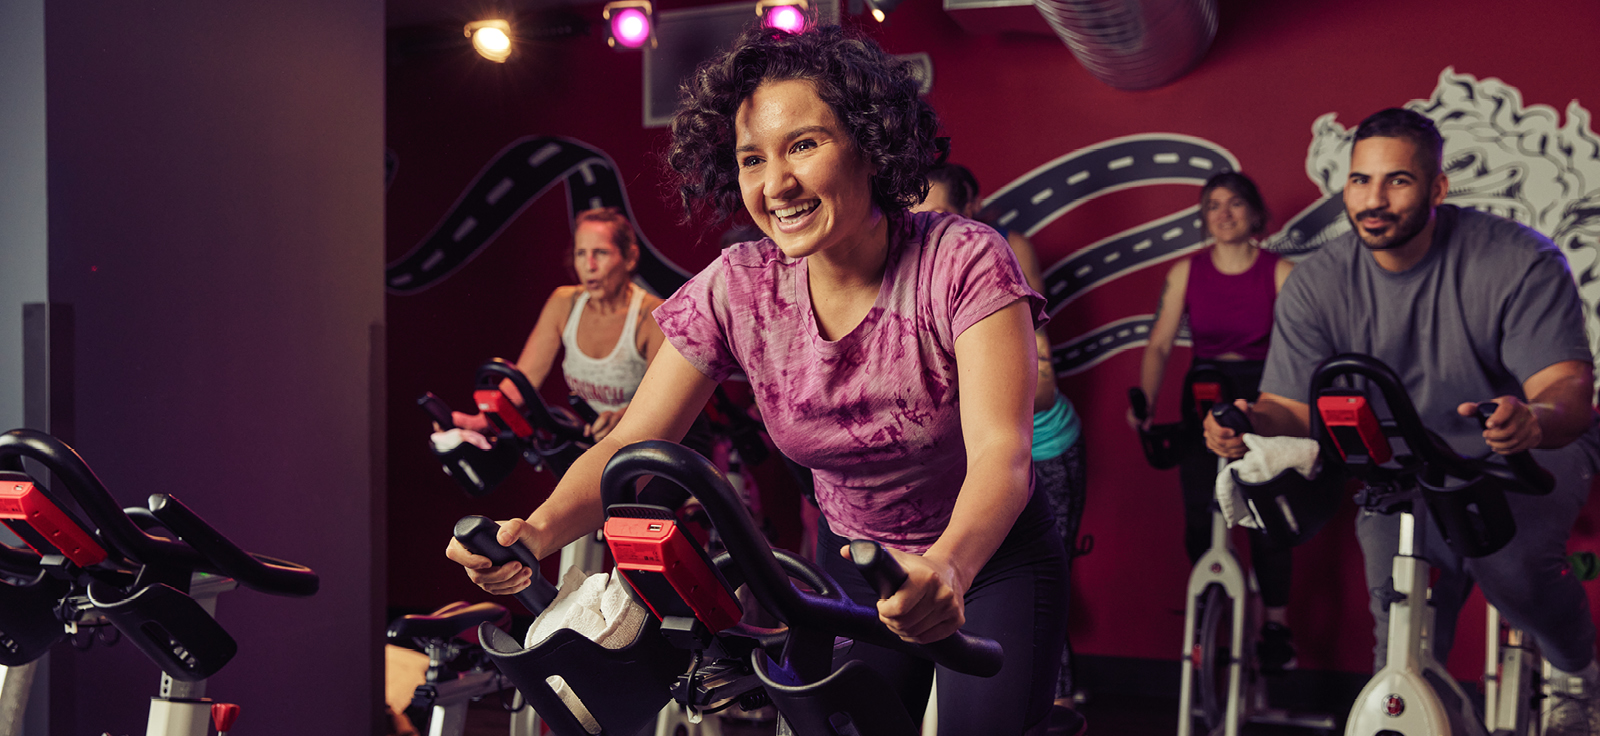 Bring the Fun to Group Fitness Classes with Crunch - Crunch